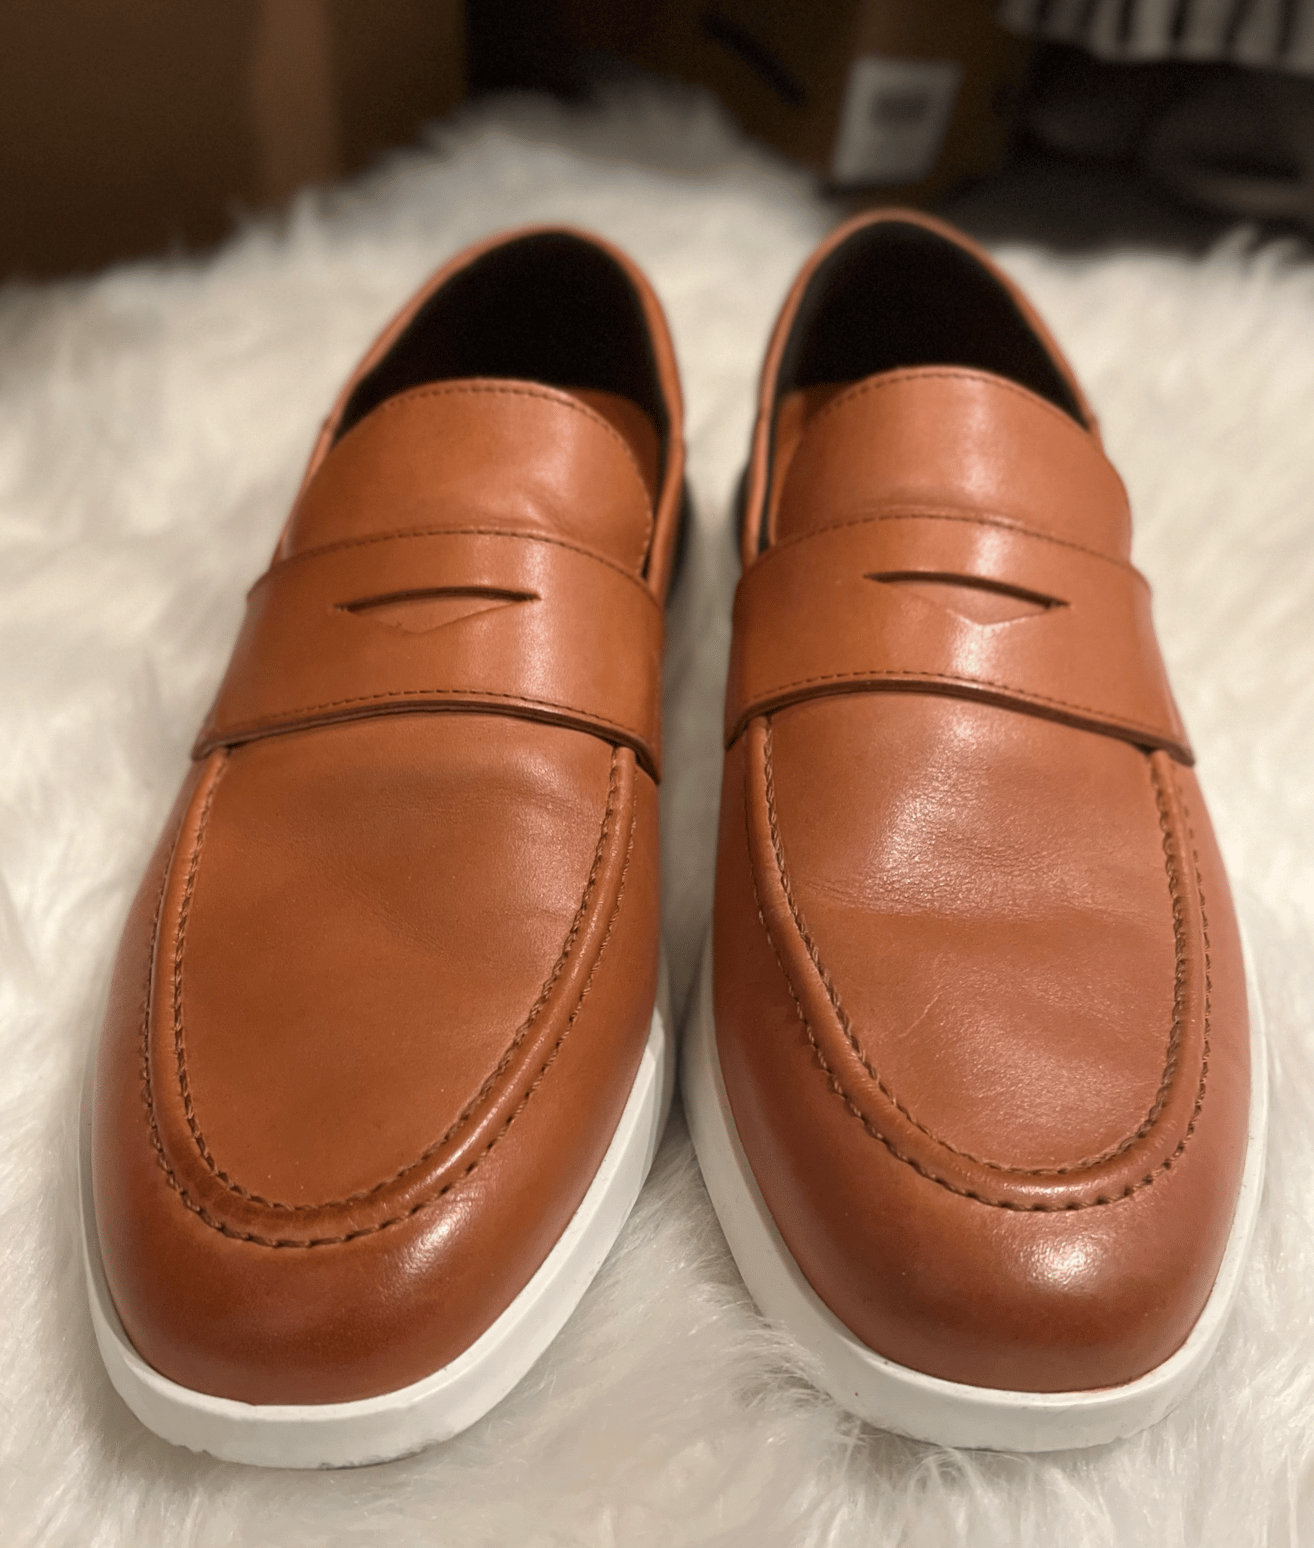 Wolf & Shepherd Crossover Loafers